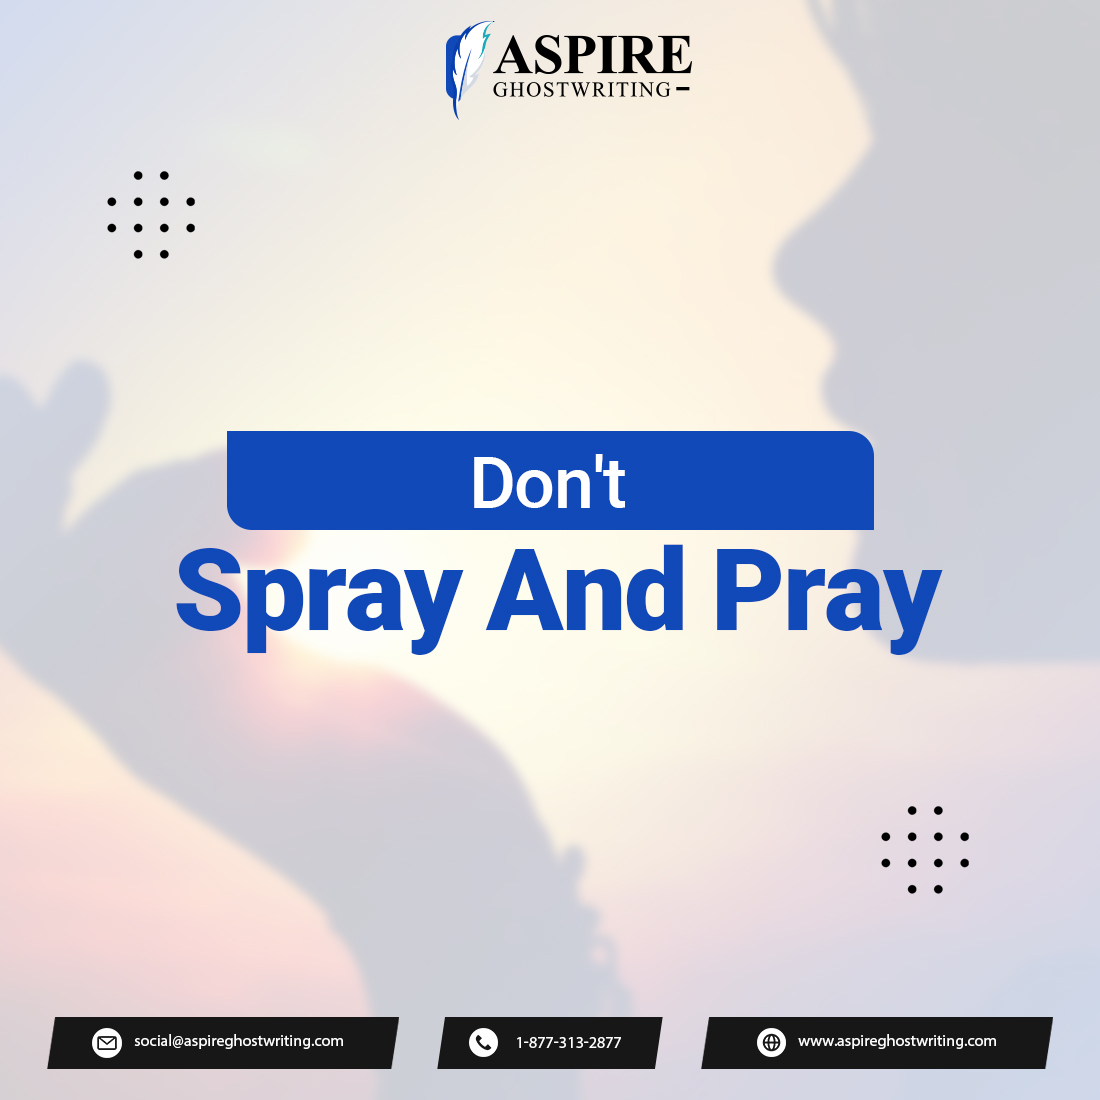 Spraying your words everywhere doesn’t yield an effective outcome? We offer a targeted approach to create an impact.

Visit our website to learn more.

#aspireghostwriting #lineediting #writingstyle #bookmarketing #bookpublishing #bookwriting #bookediting